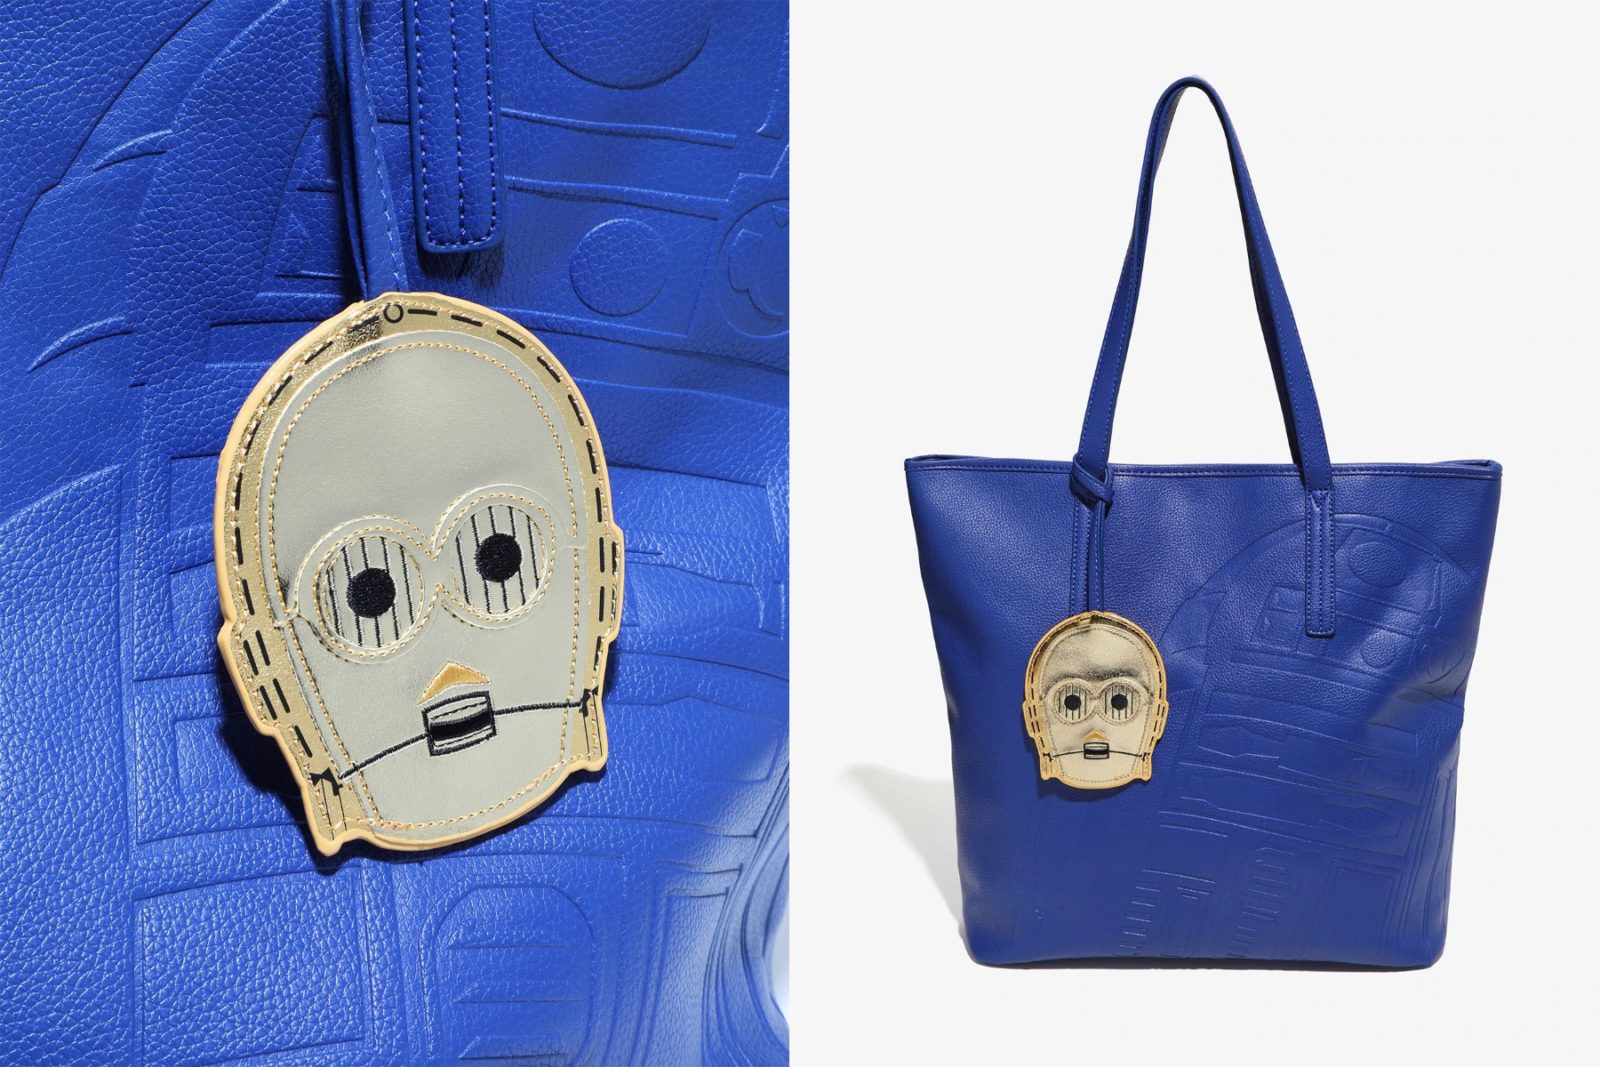 Loungefly x Star Wars R2-D2 Debossed Tote Bag on sale at Box Lunch